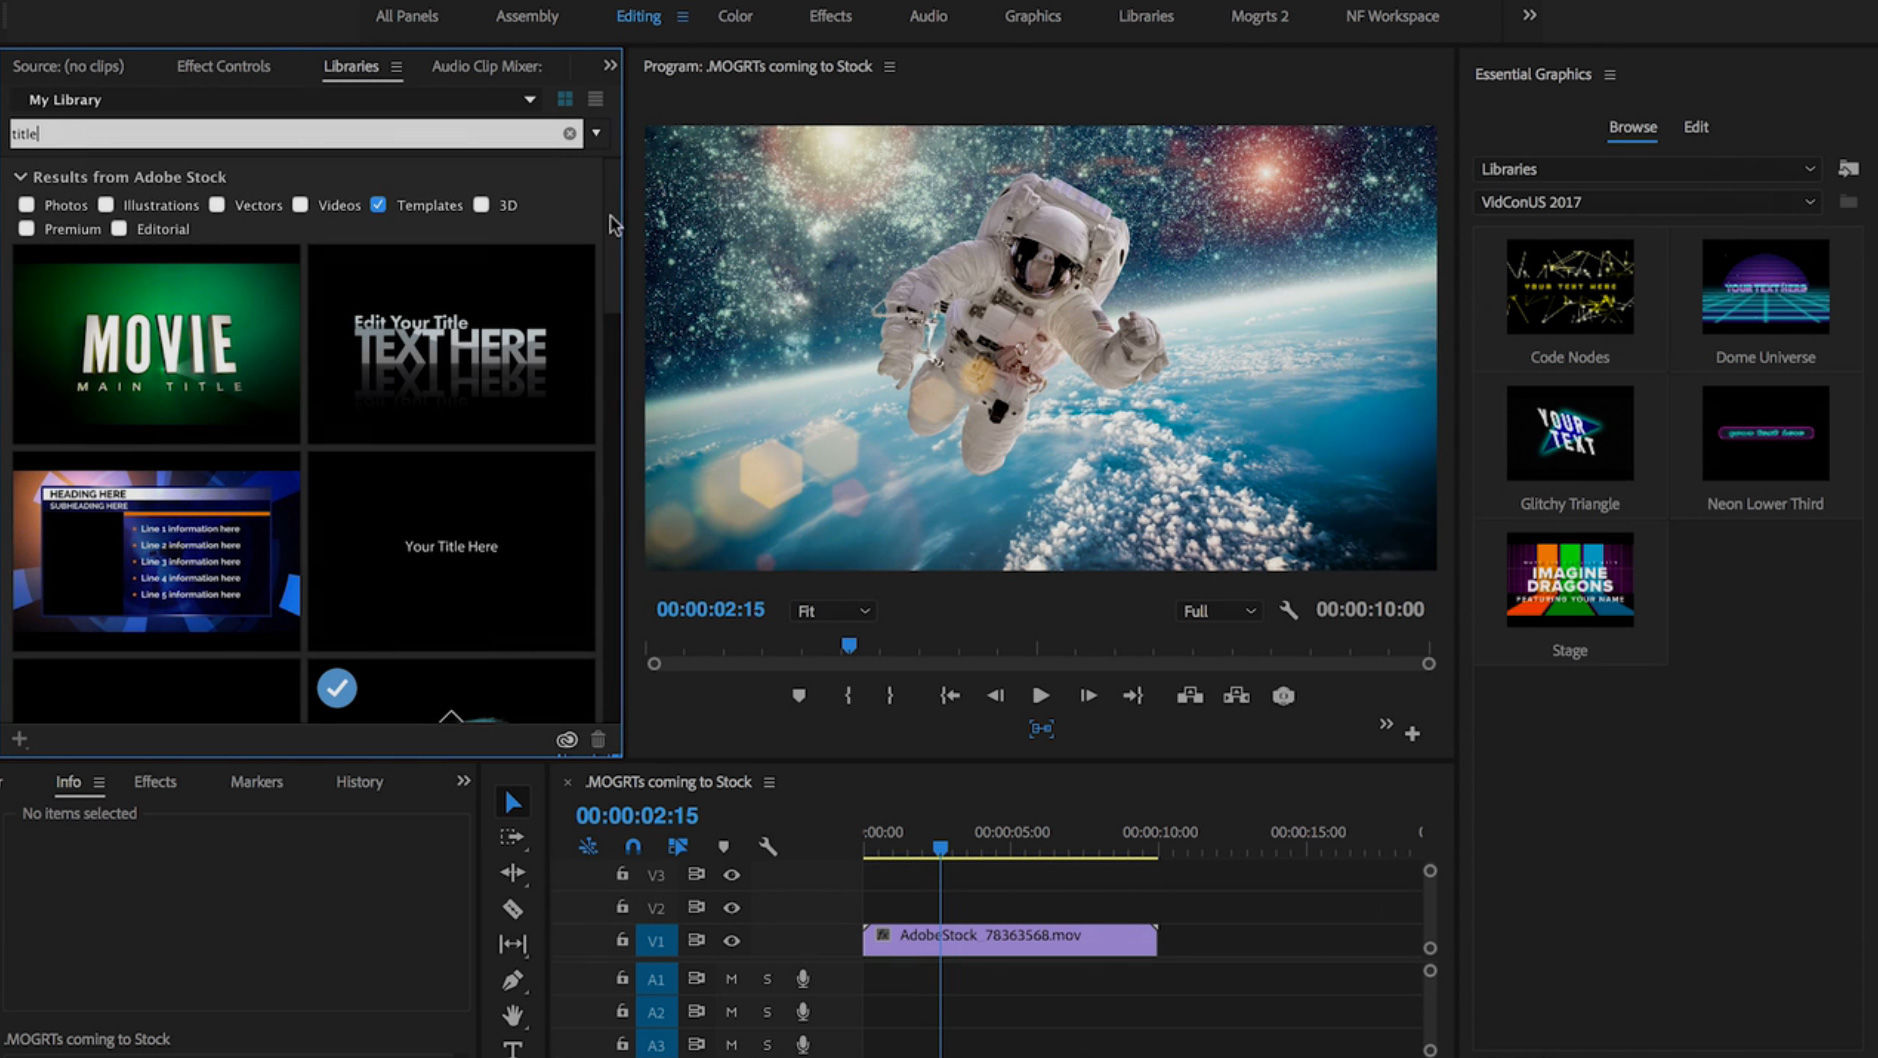 Adobe reveals details of next versions of After Effects and Premiere Pro